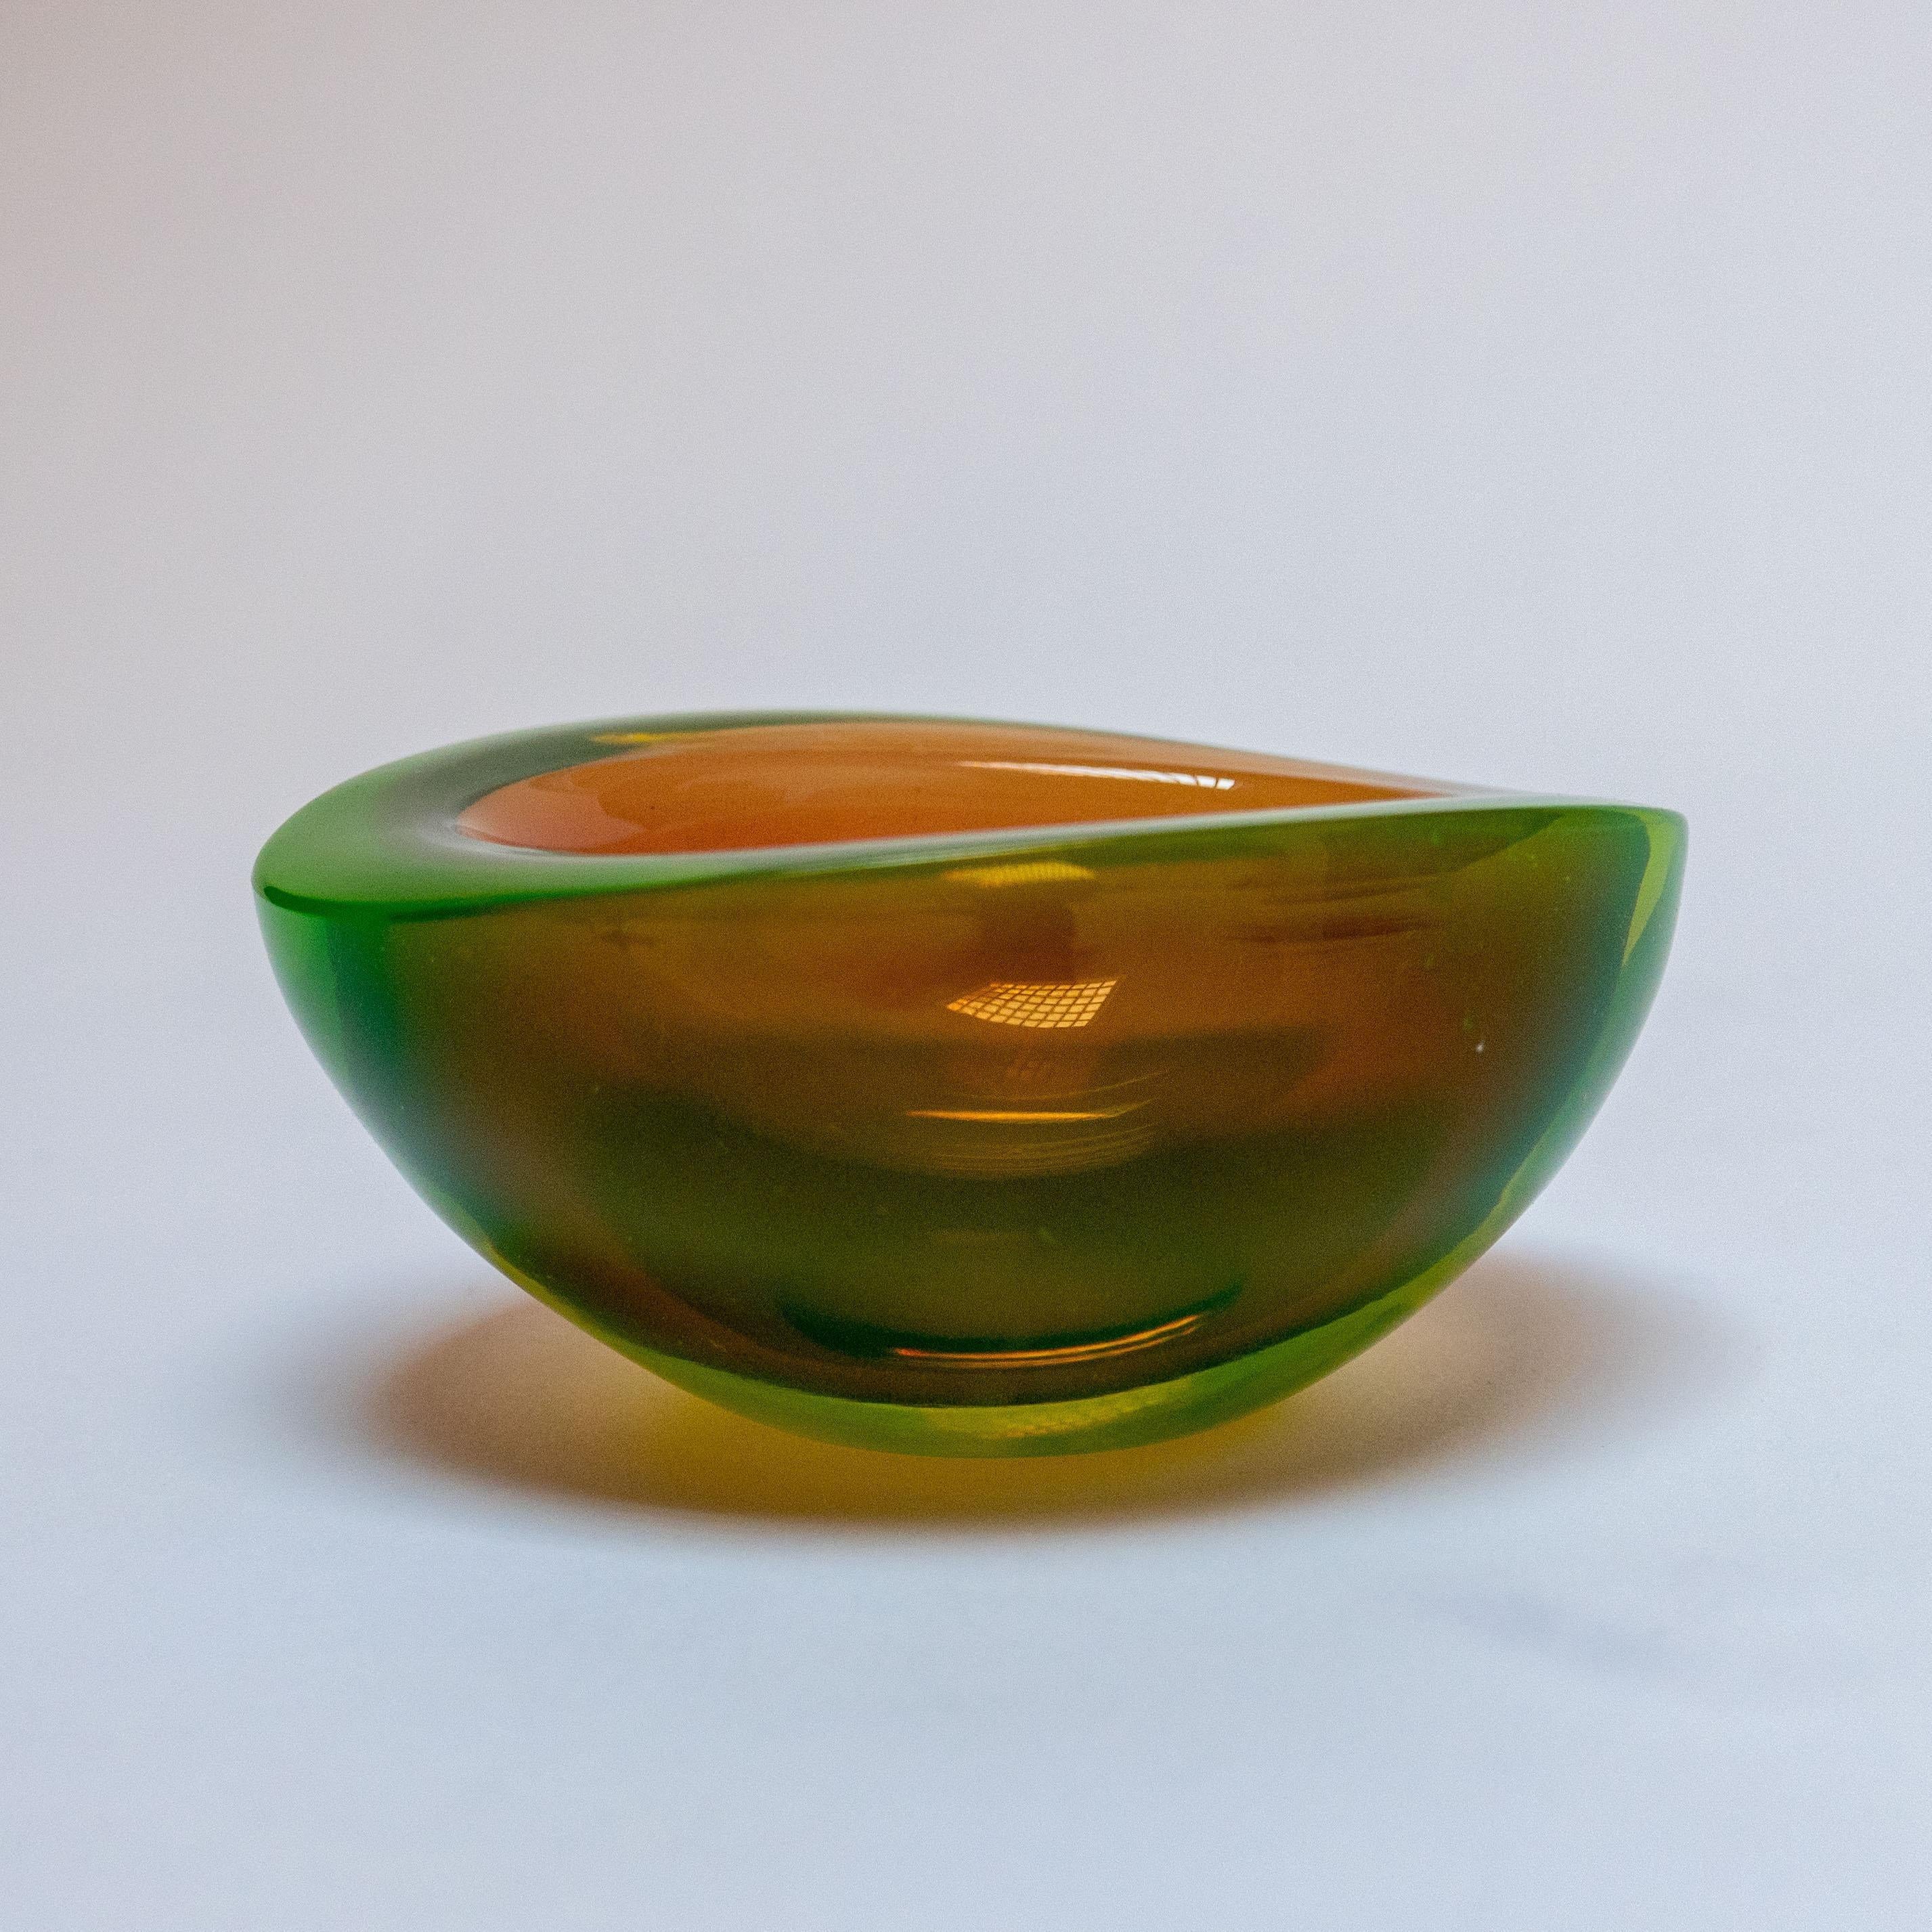 Italian Vintage Mid Century Murano Glass Bowl in Matte Green with Orange Accents For Sale